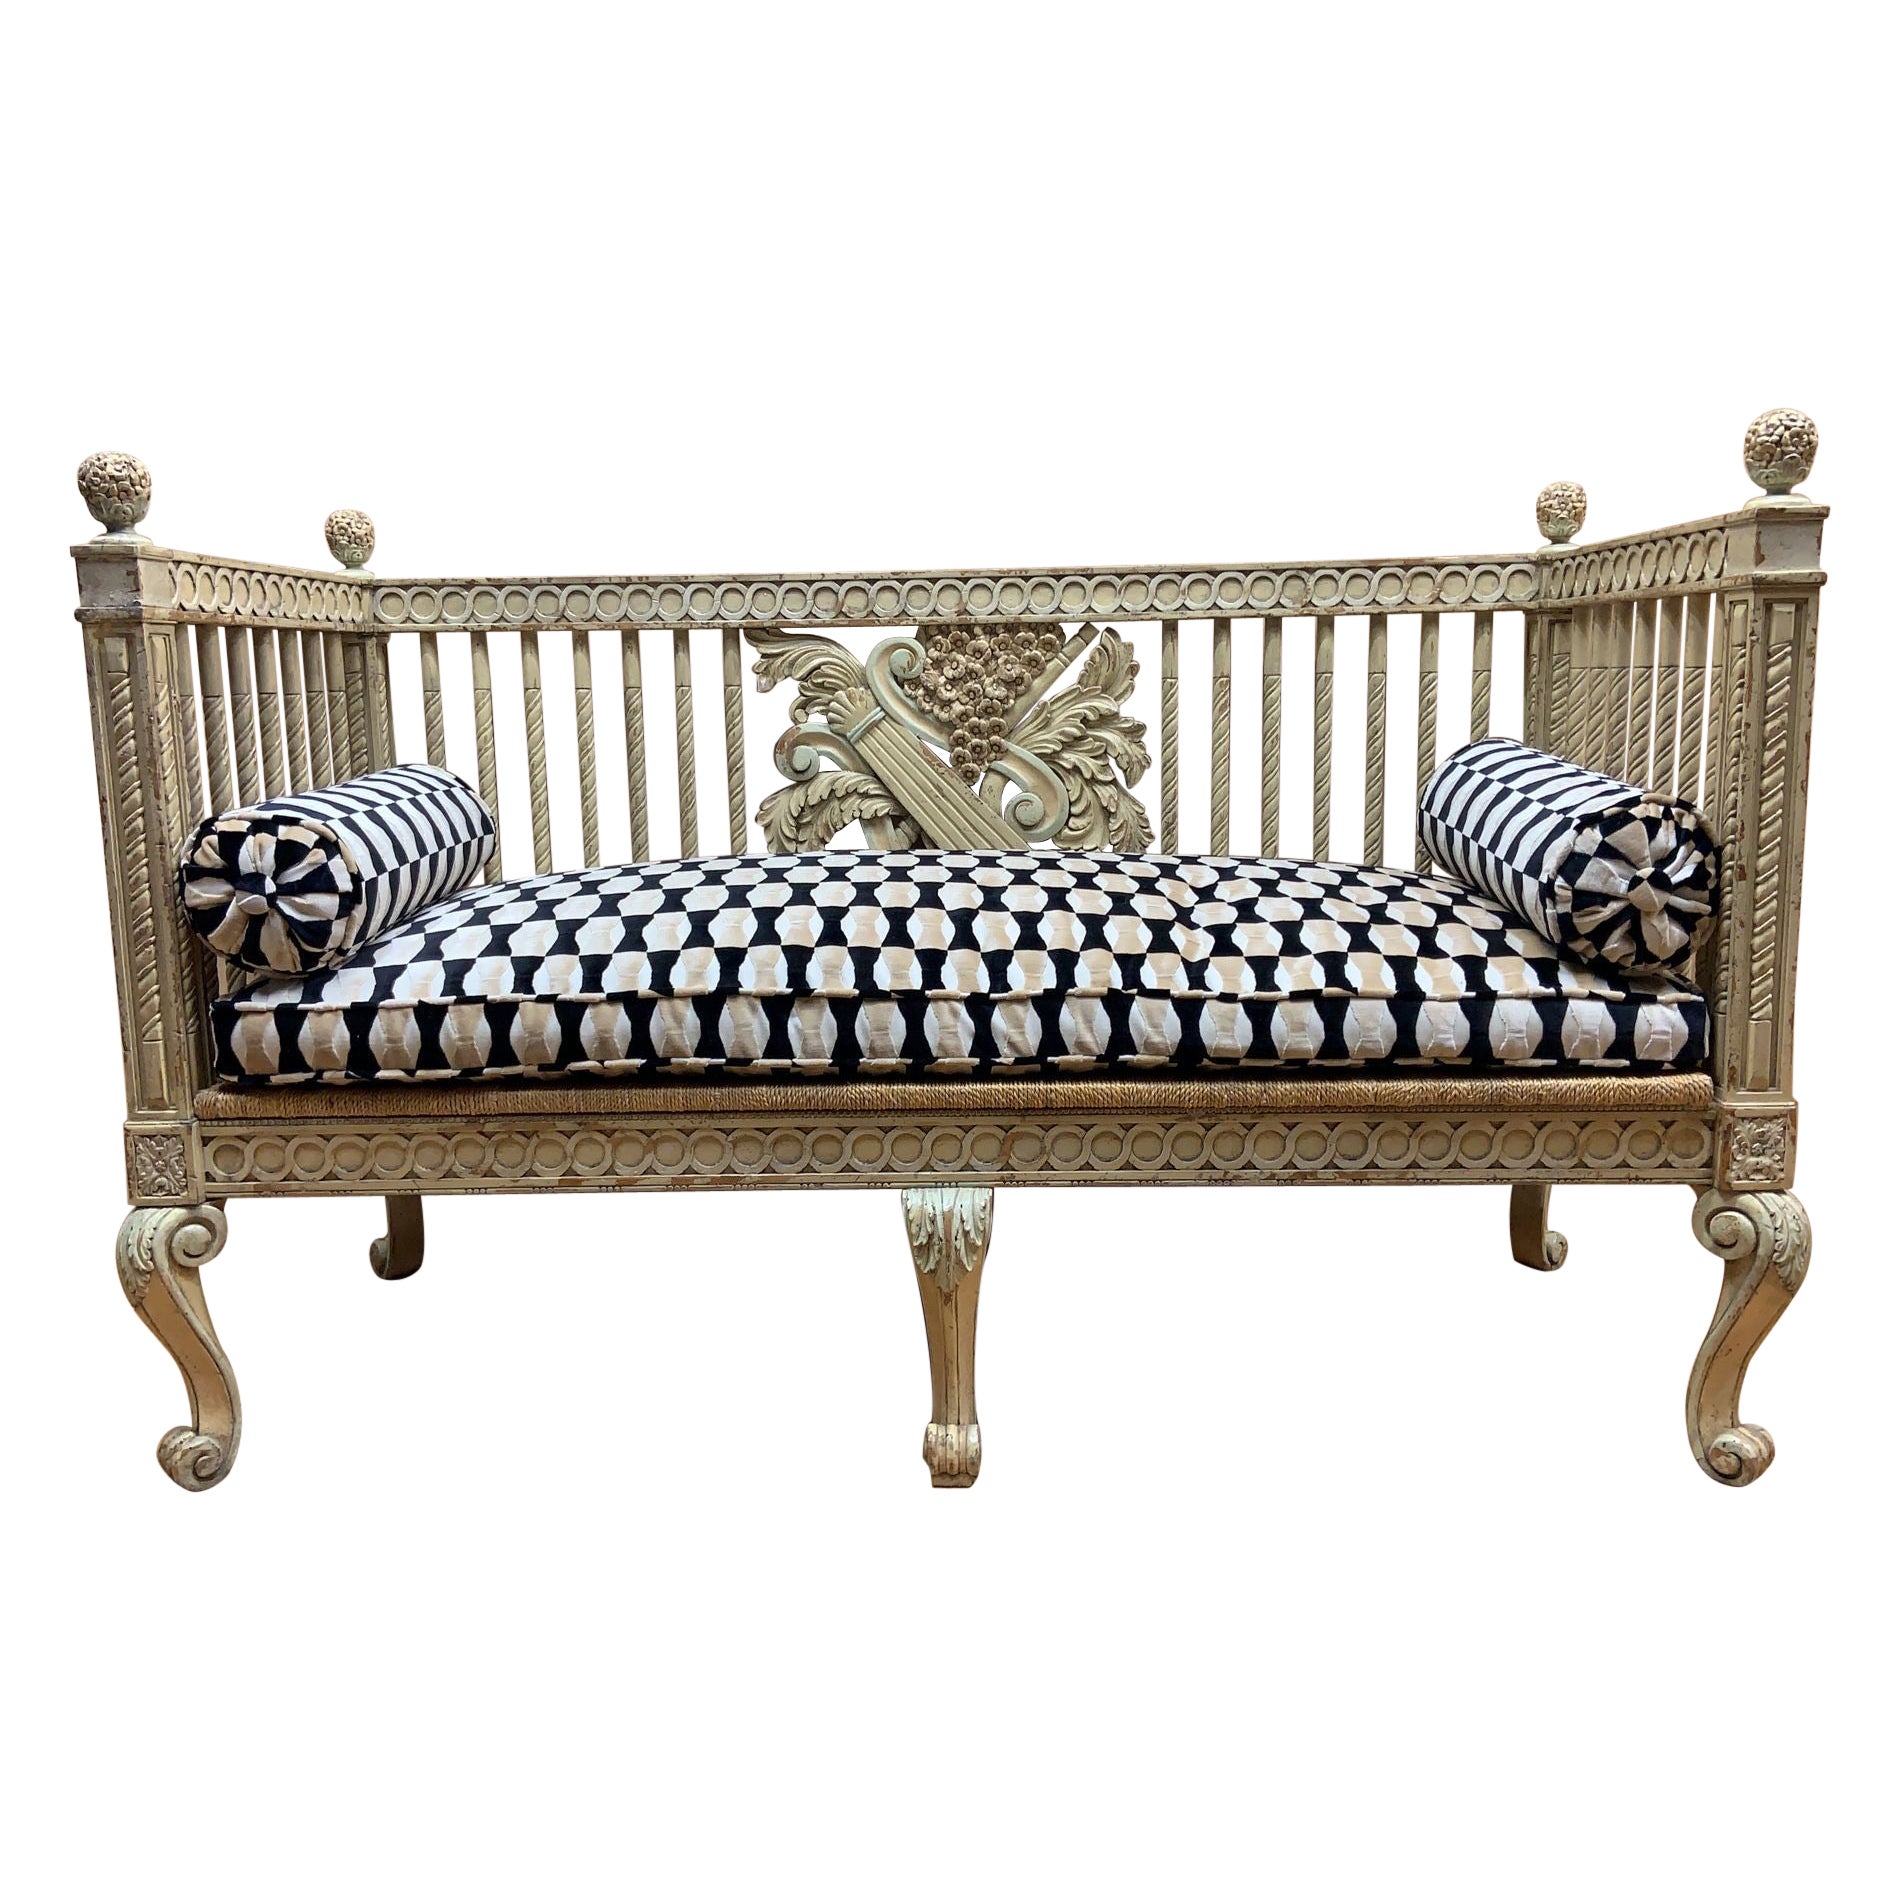 Vintage Italian Neoclassical Carved Settee Bench For Sale